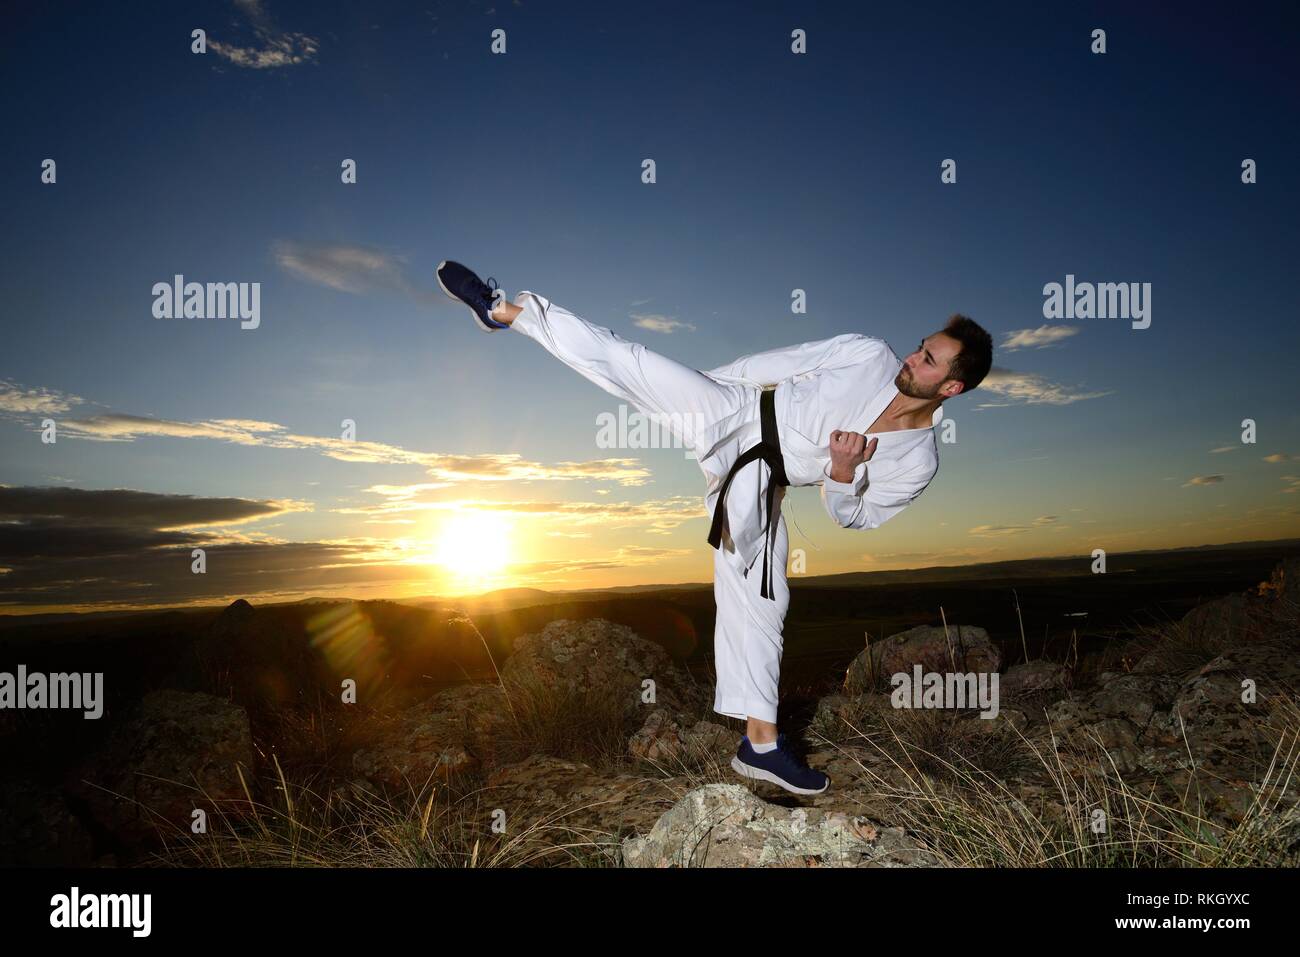 Specialist in martial arts making technical movements. Stock Photo